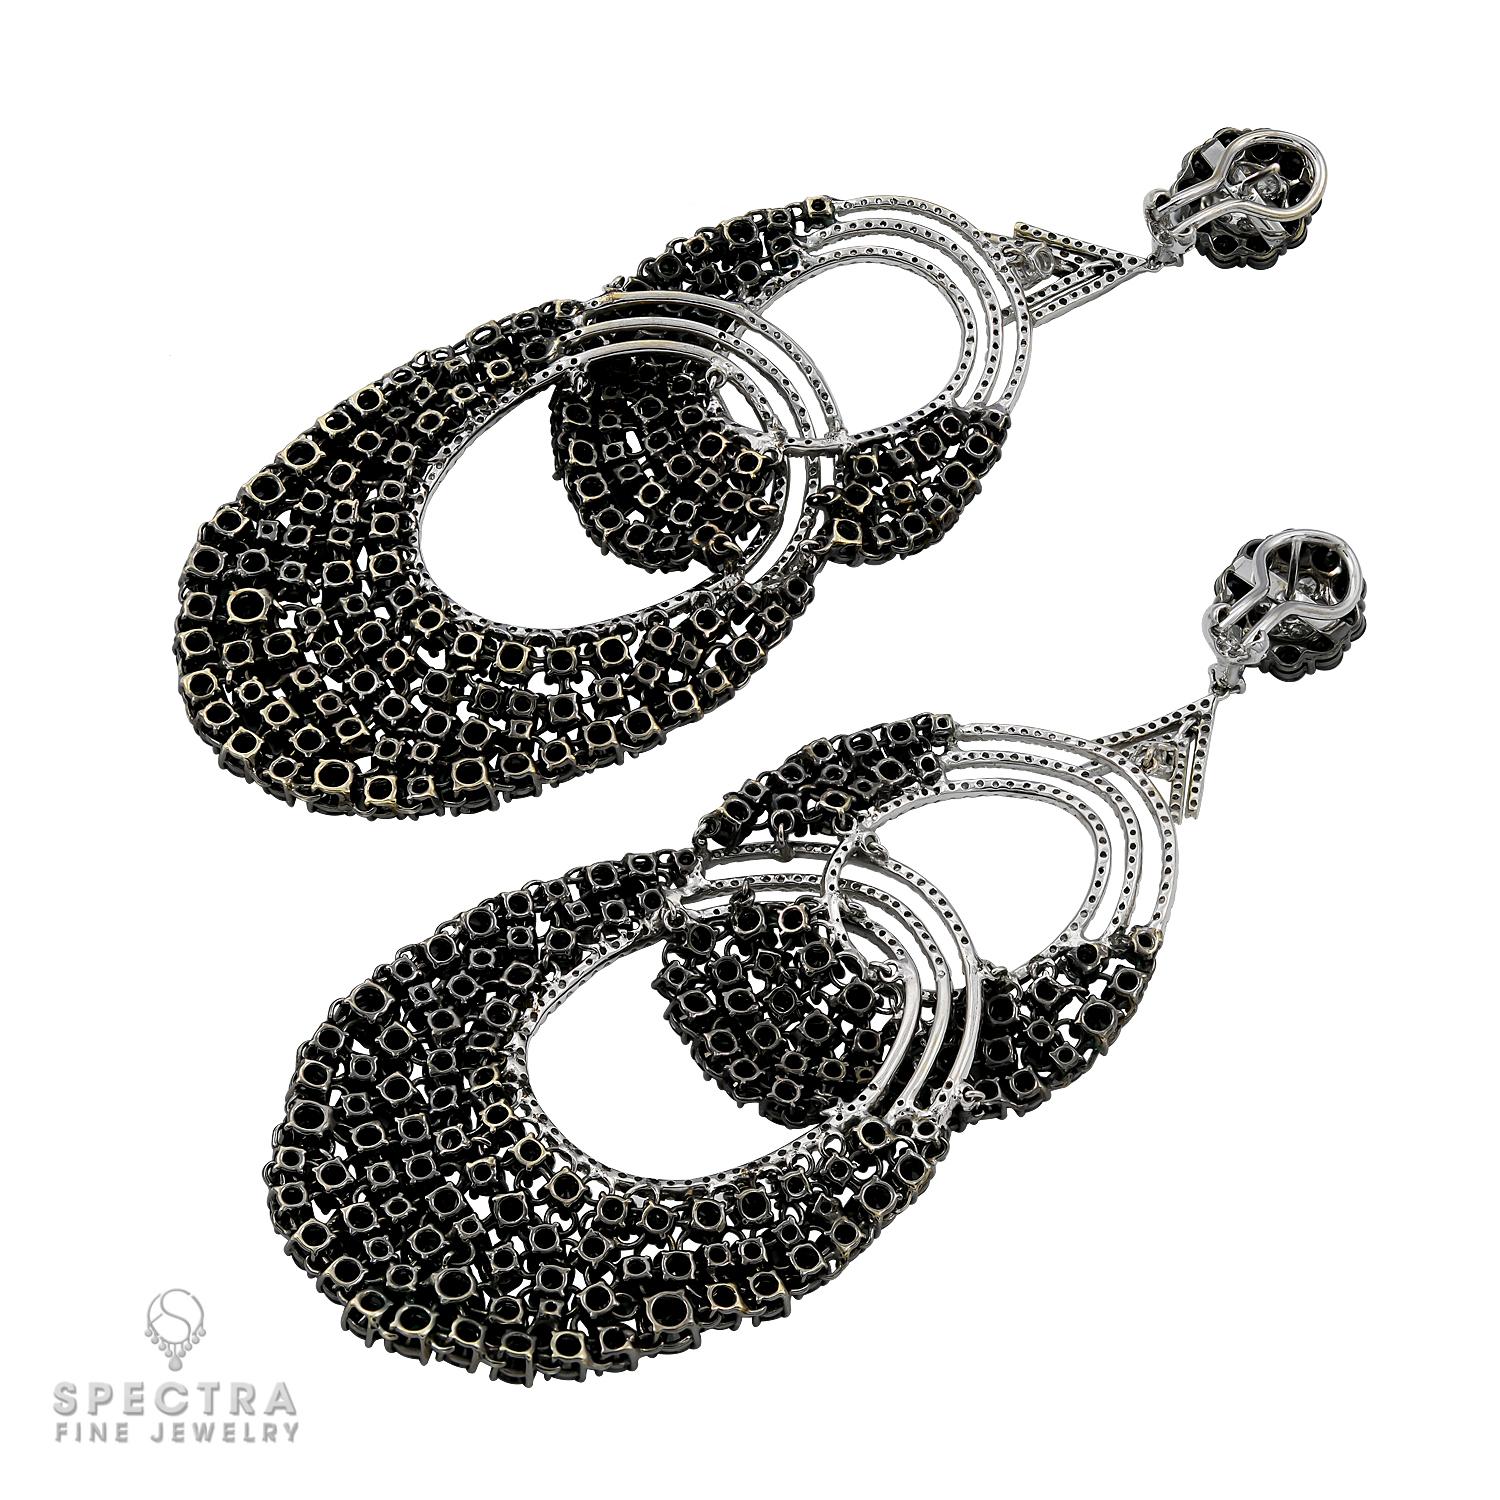 Beautiful chandelier earrings embellished with black and white natural diamonds. 
18k white gold, gross weight 55.24 g.
The earrings are 4.33 inch long (11 cm).